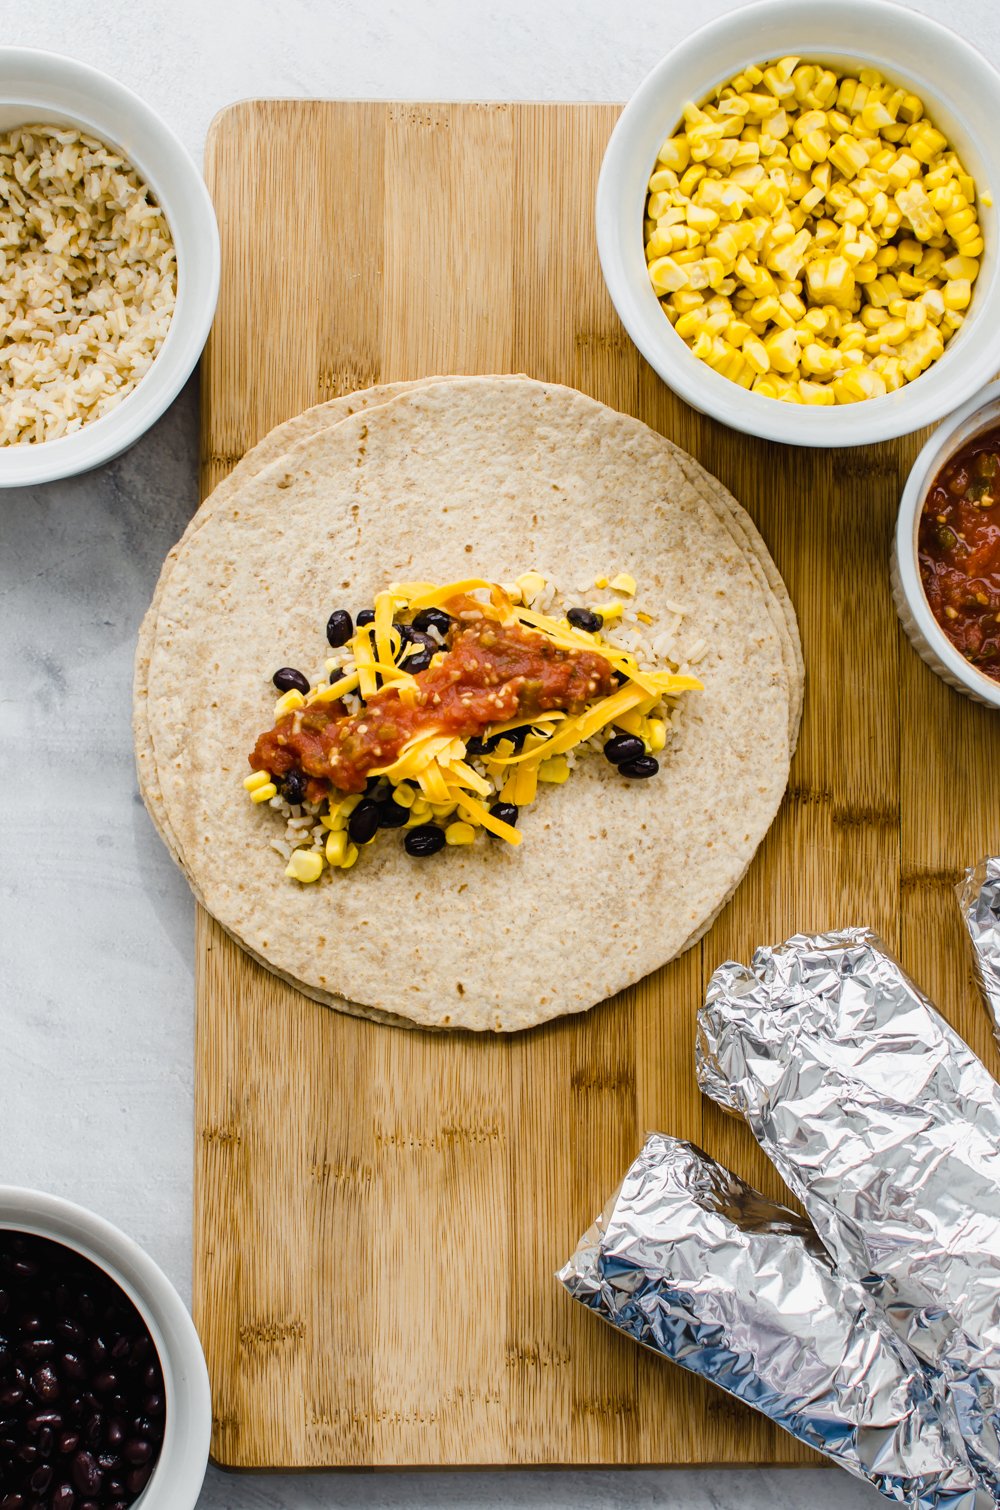 vegetarian lunch wraps on a wooden cutting board with small bowls of corn, salsa, and rice.